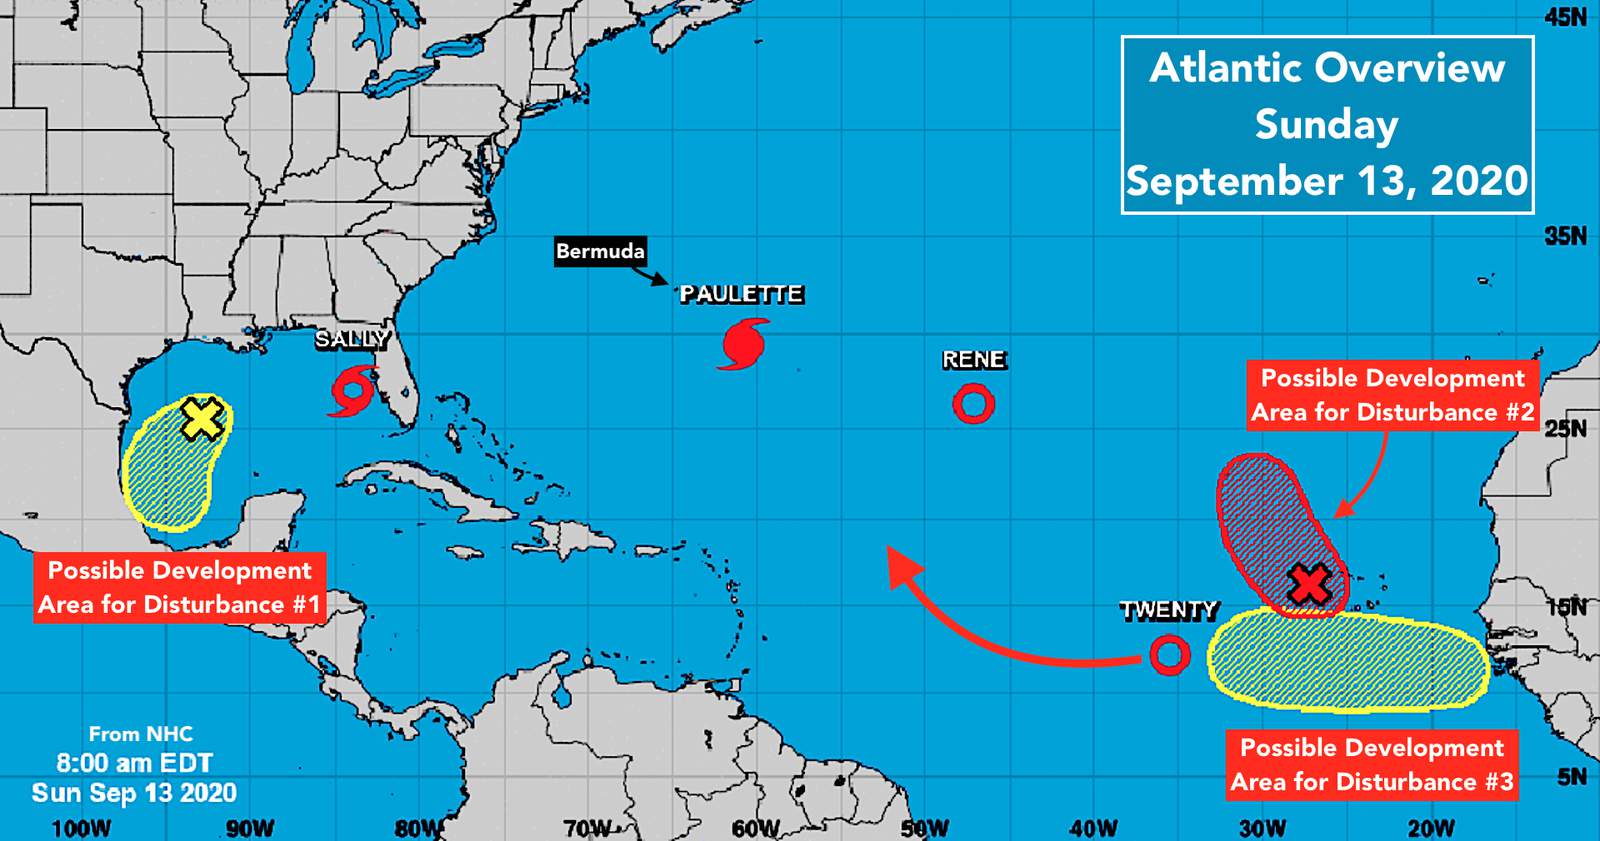 Norcross: All eyes on Sally in Gulf while there’s good news from eastern Atlantic